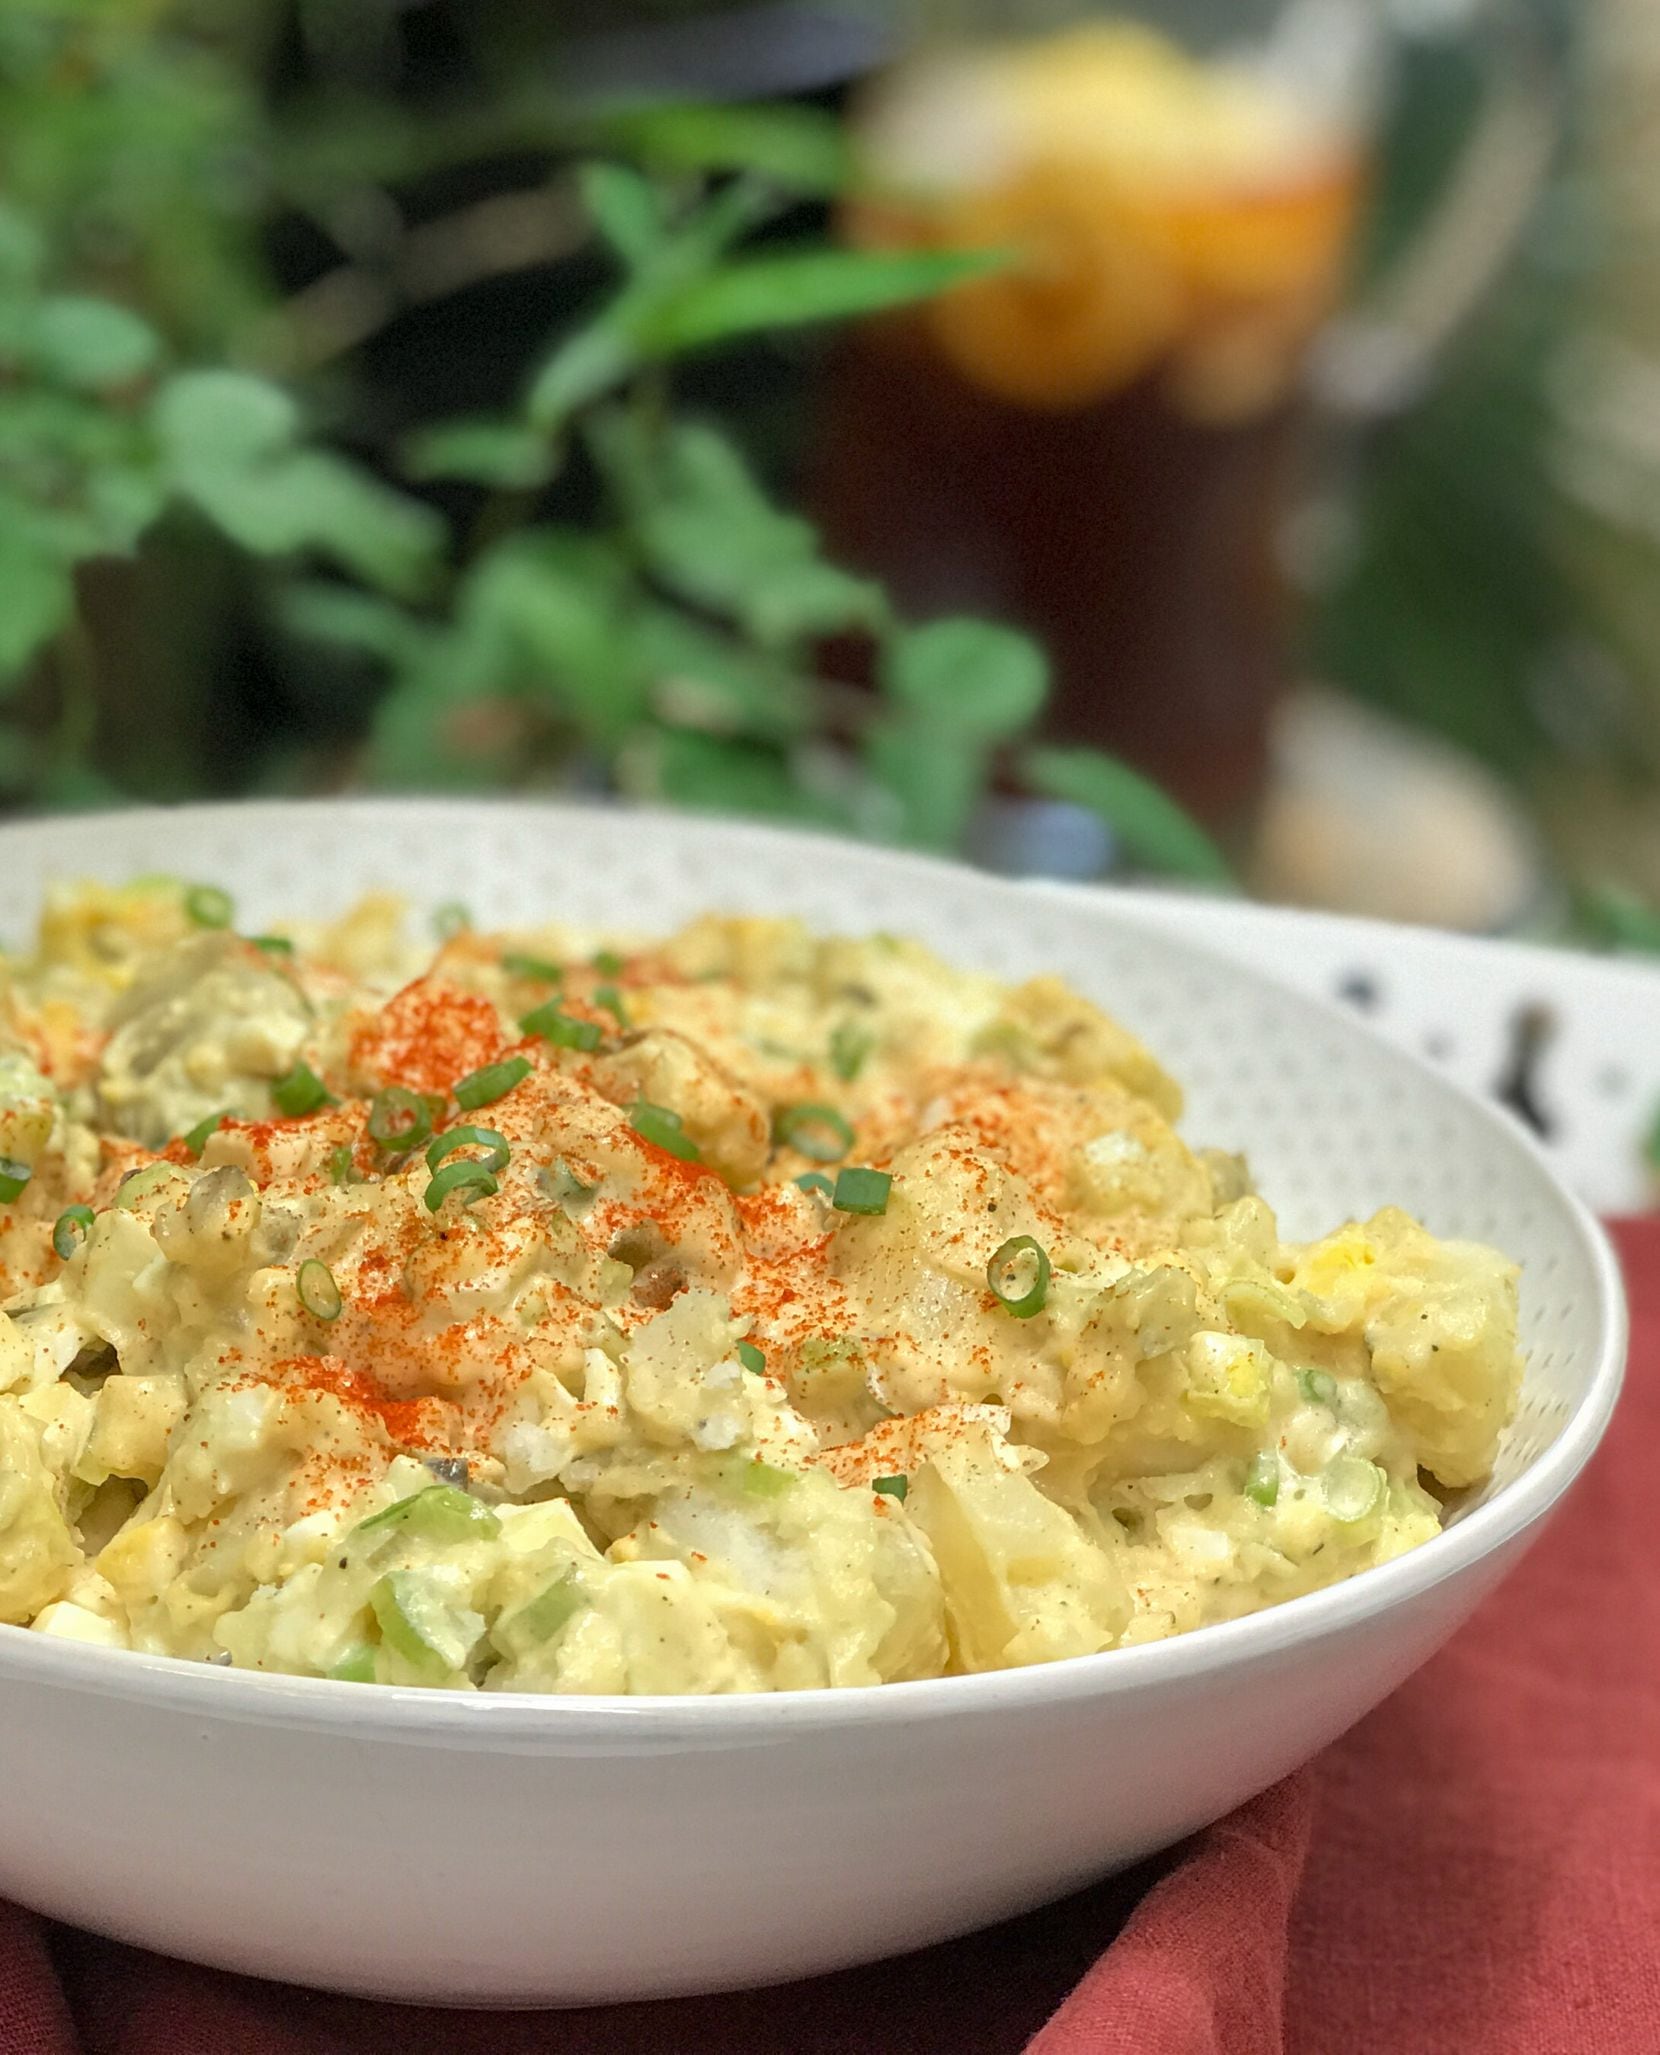 Country-Style Potato Salad from "Jubilee: Recipes From Two Centuries of African American Cooking" by Toni Tipton-Martin